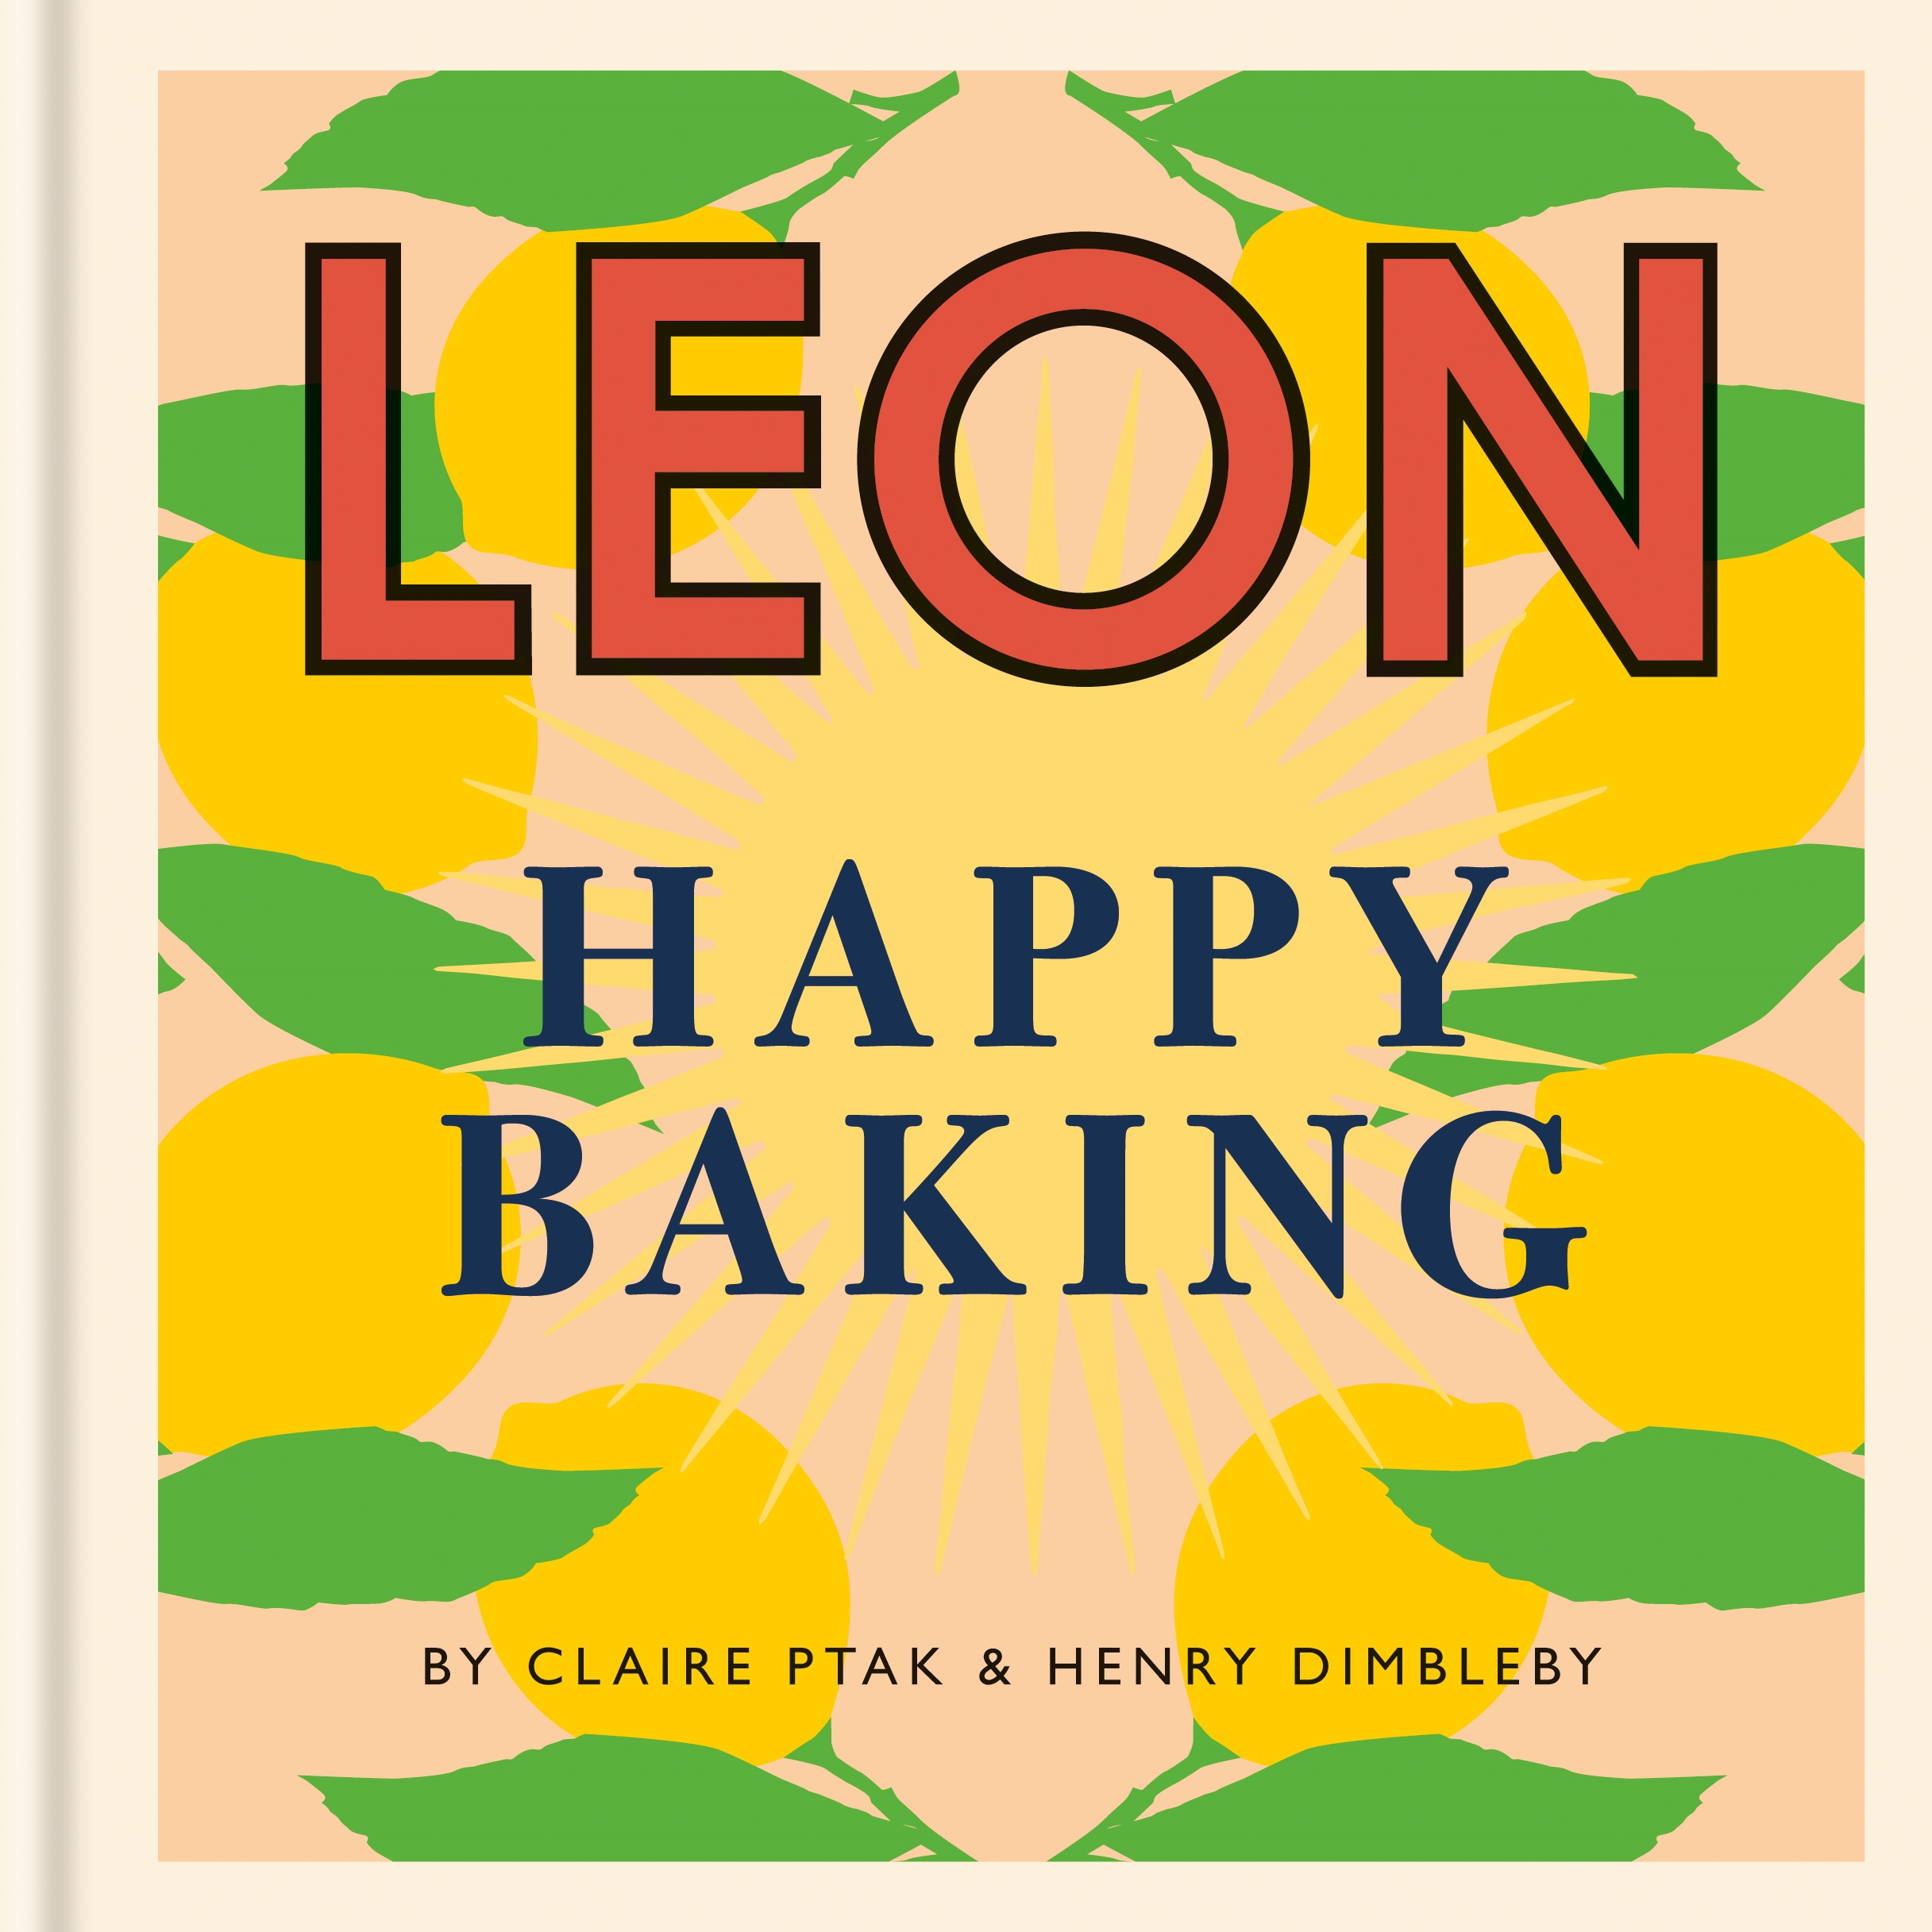 LEON Happy Baking by Claire Ptak and Henry Dimbleby is published by Hachette Australia, $29.99. Photography by Steven Joyce.